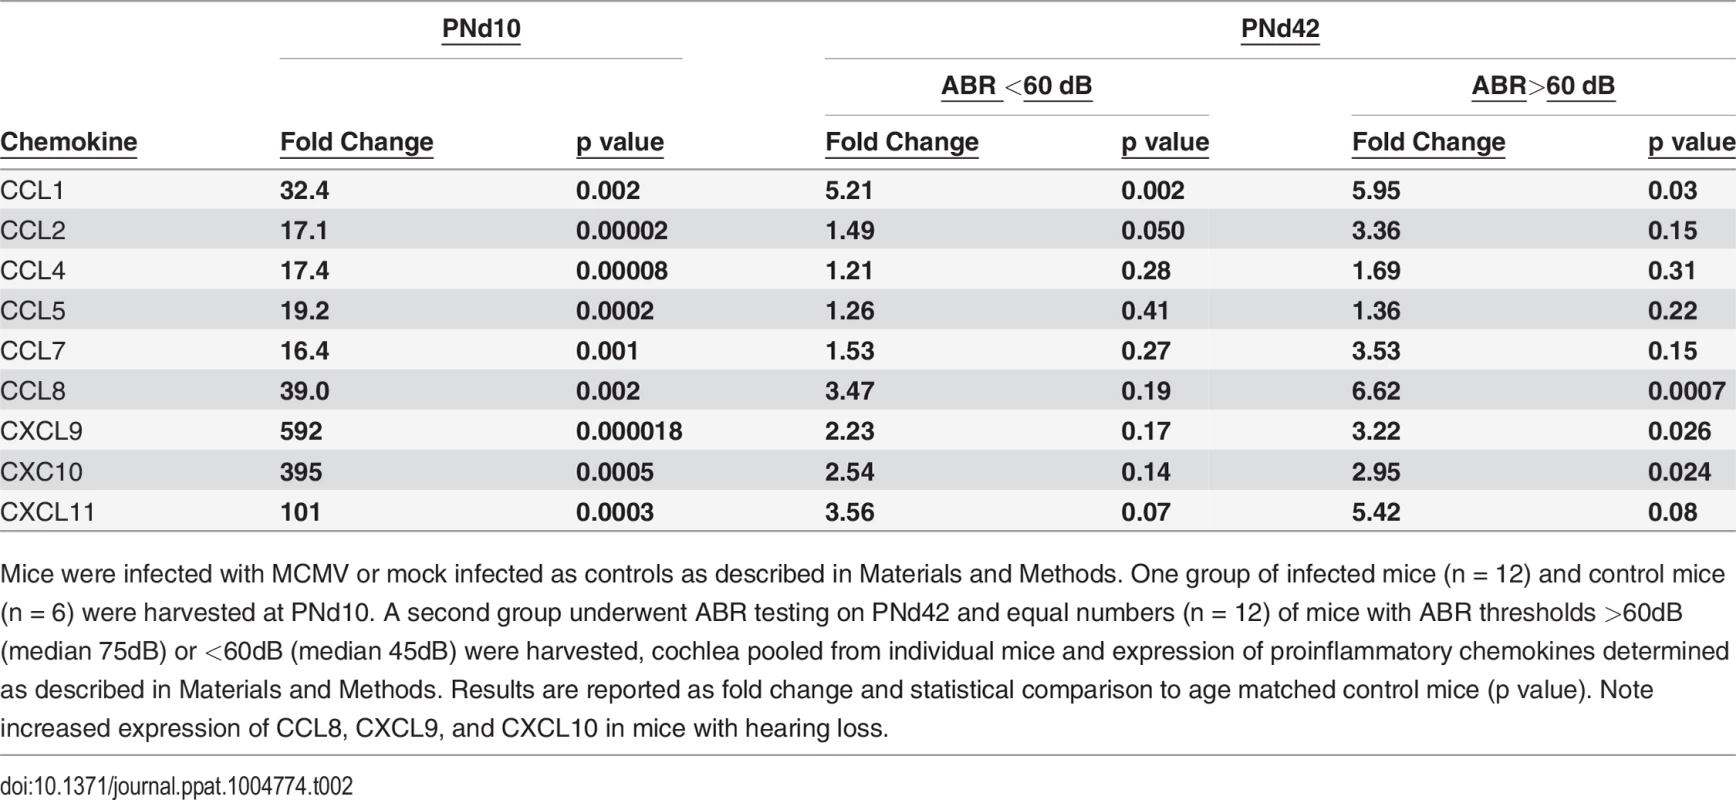 Persistent expression of proinflammatory chemokines in cochlea of mice with ABR thresholds &gt;60dB.